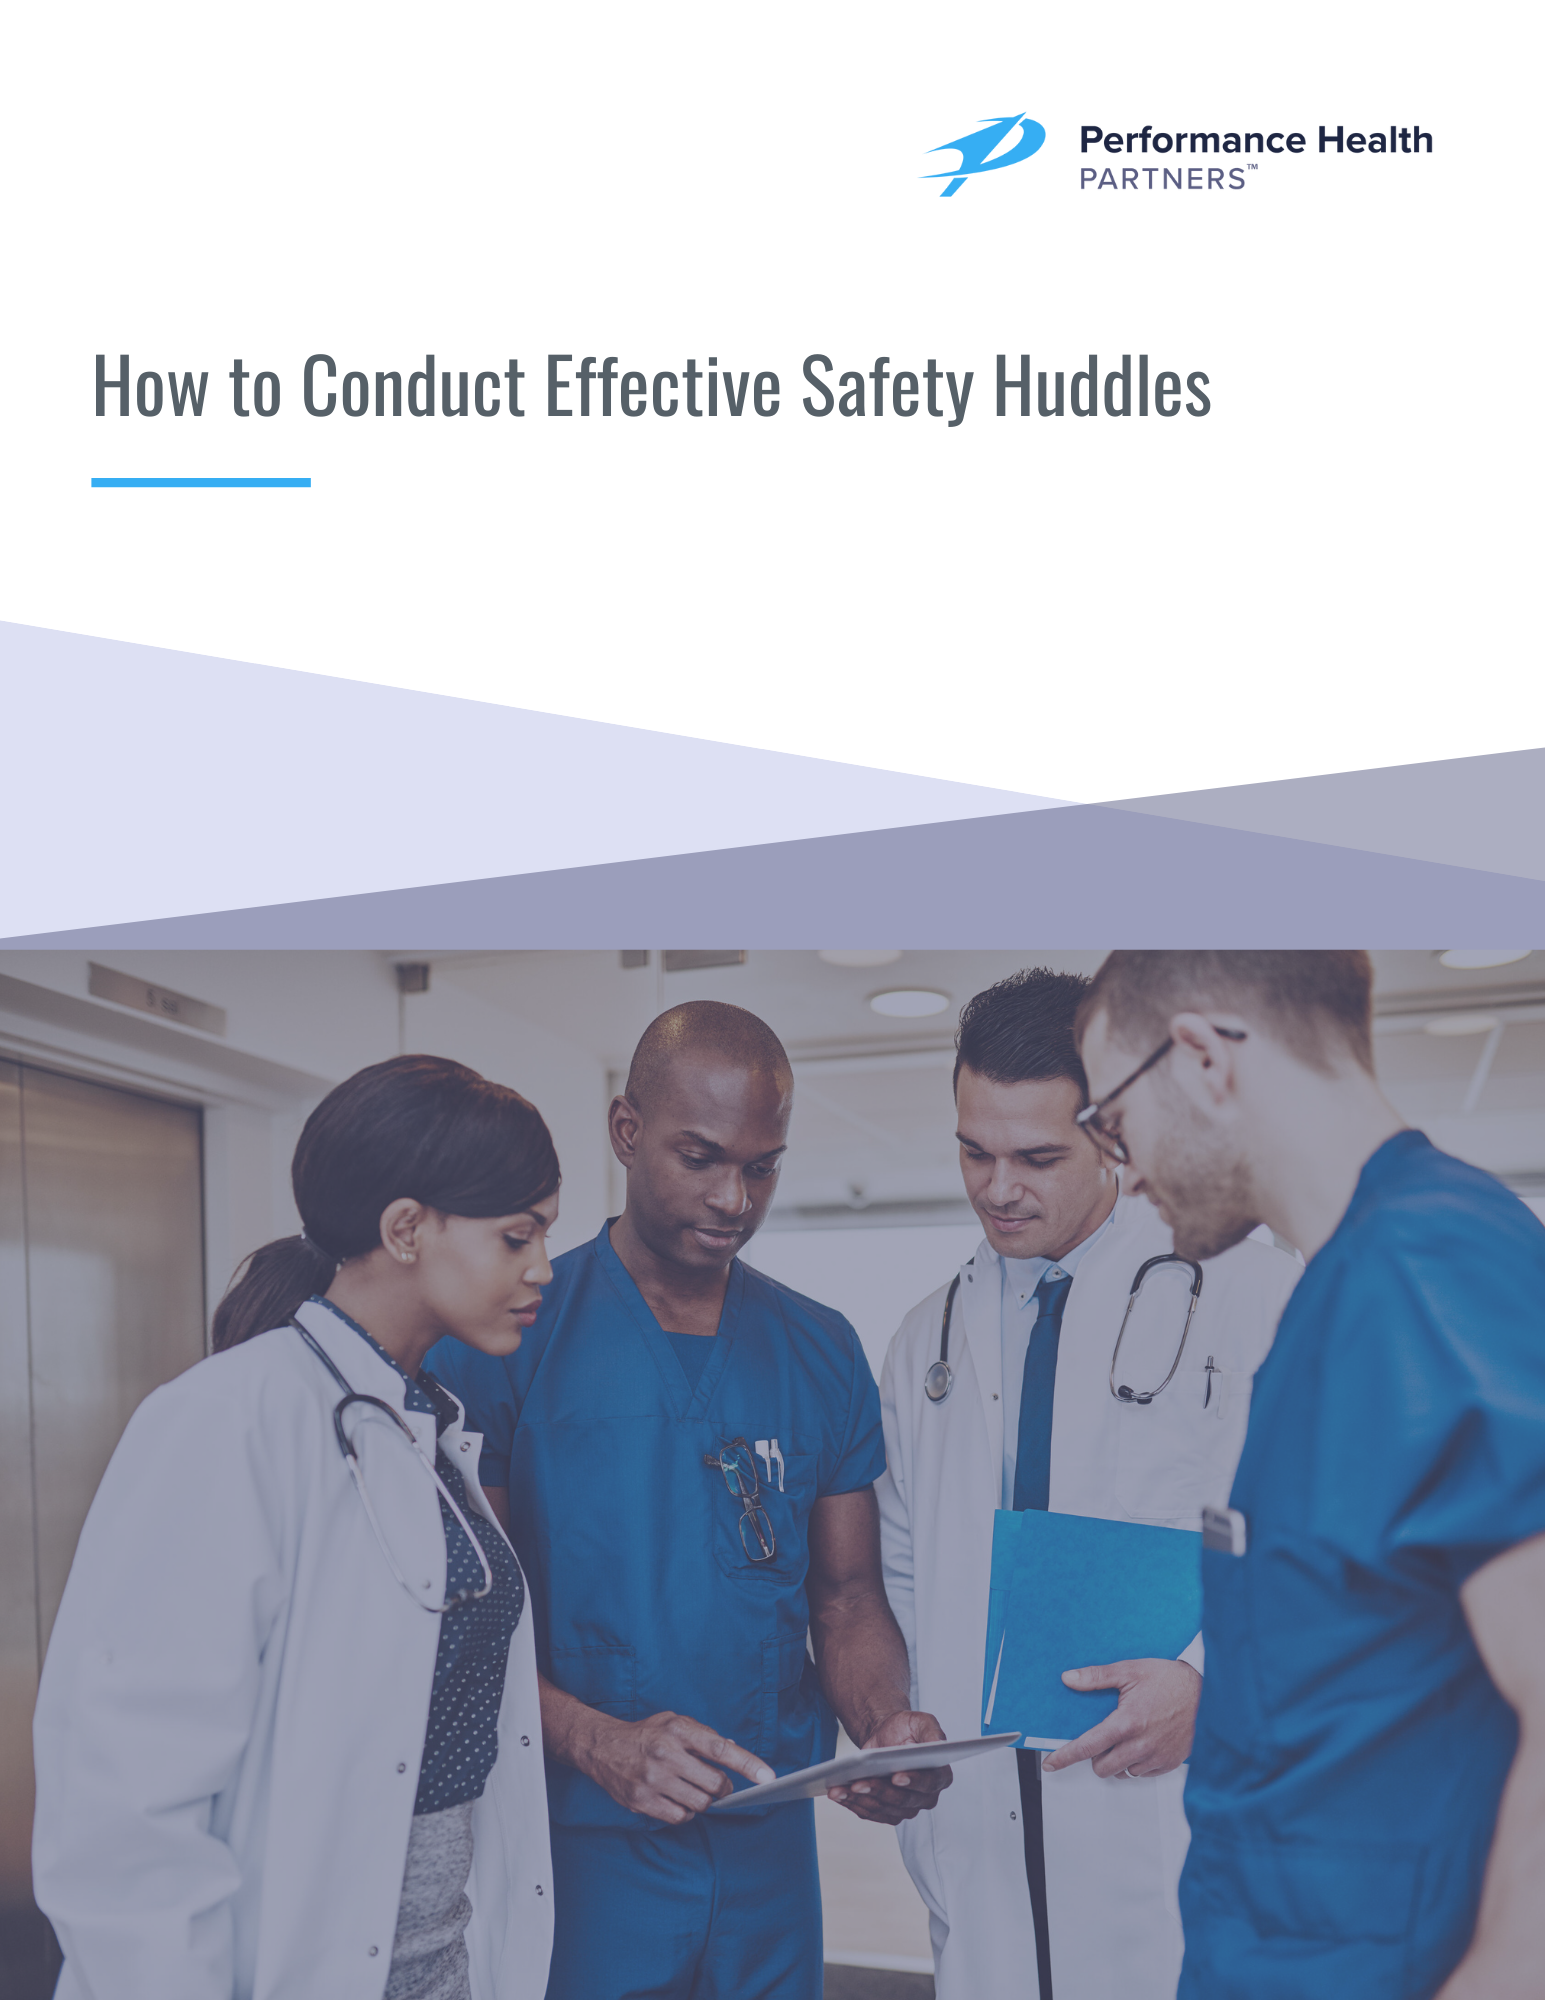 How to Conduct Effective Safety Huddles Whitepaper